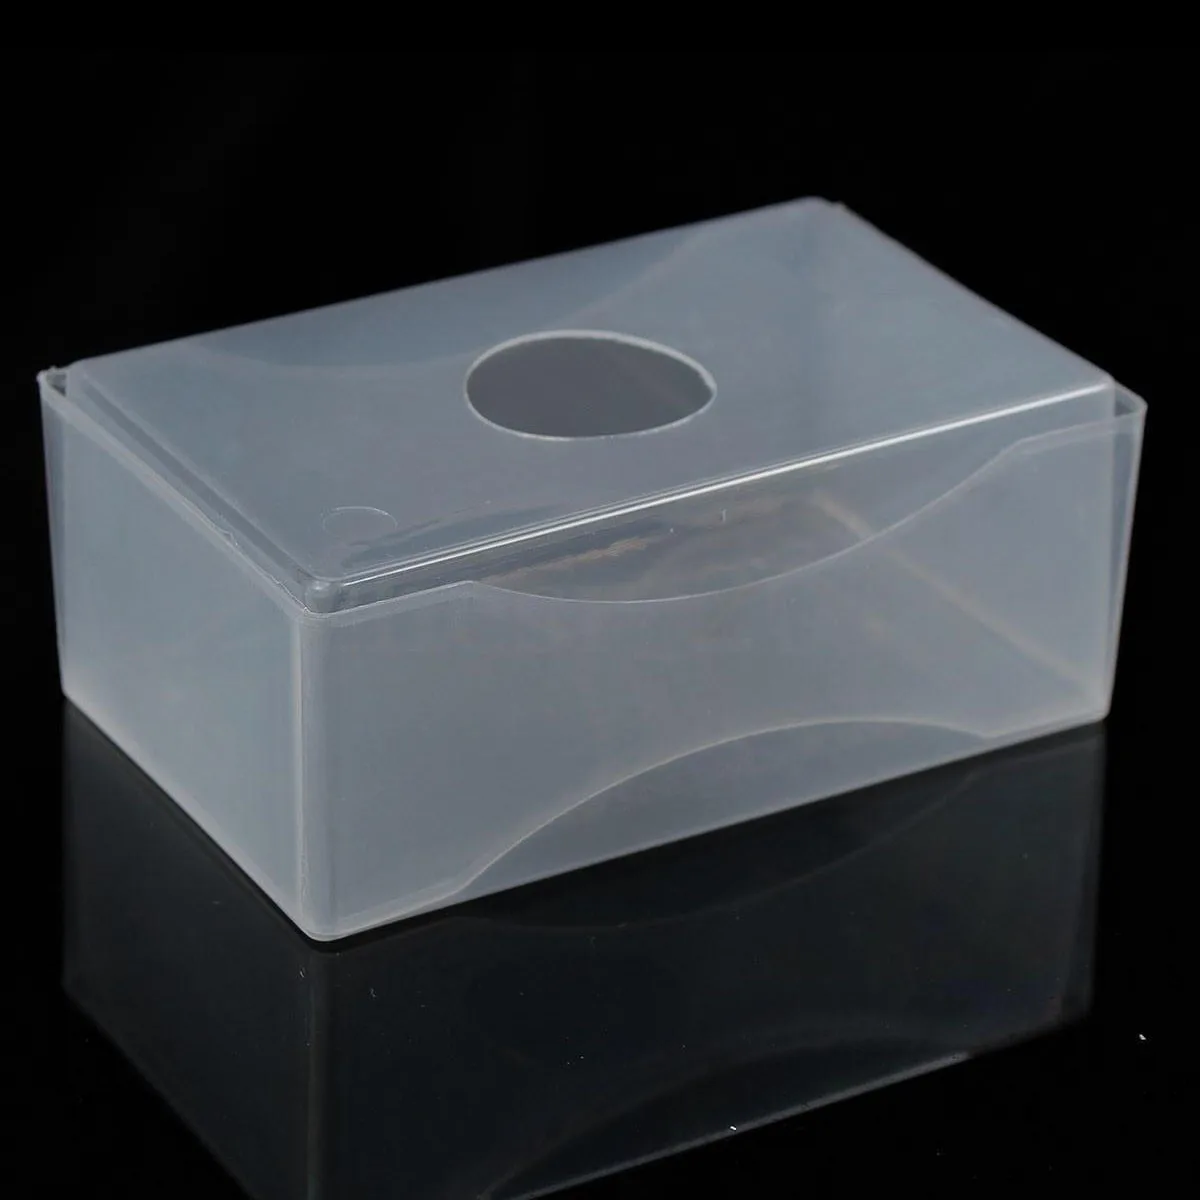 10 Pcs/lot New Pvc Transparent White Business Card Box Plastic Craft  Container 100 Cards Holder Storage Boxes Office Supplies - Business Card  Holders - AliExpress